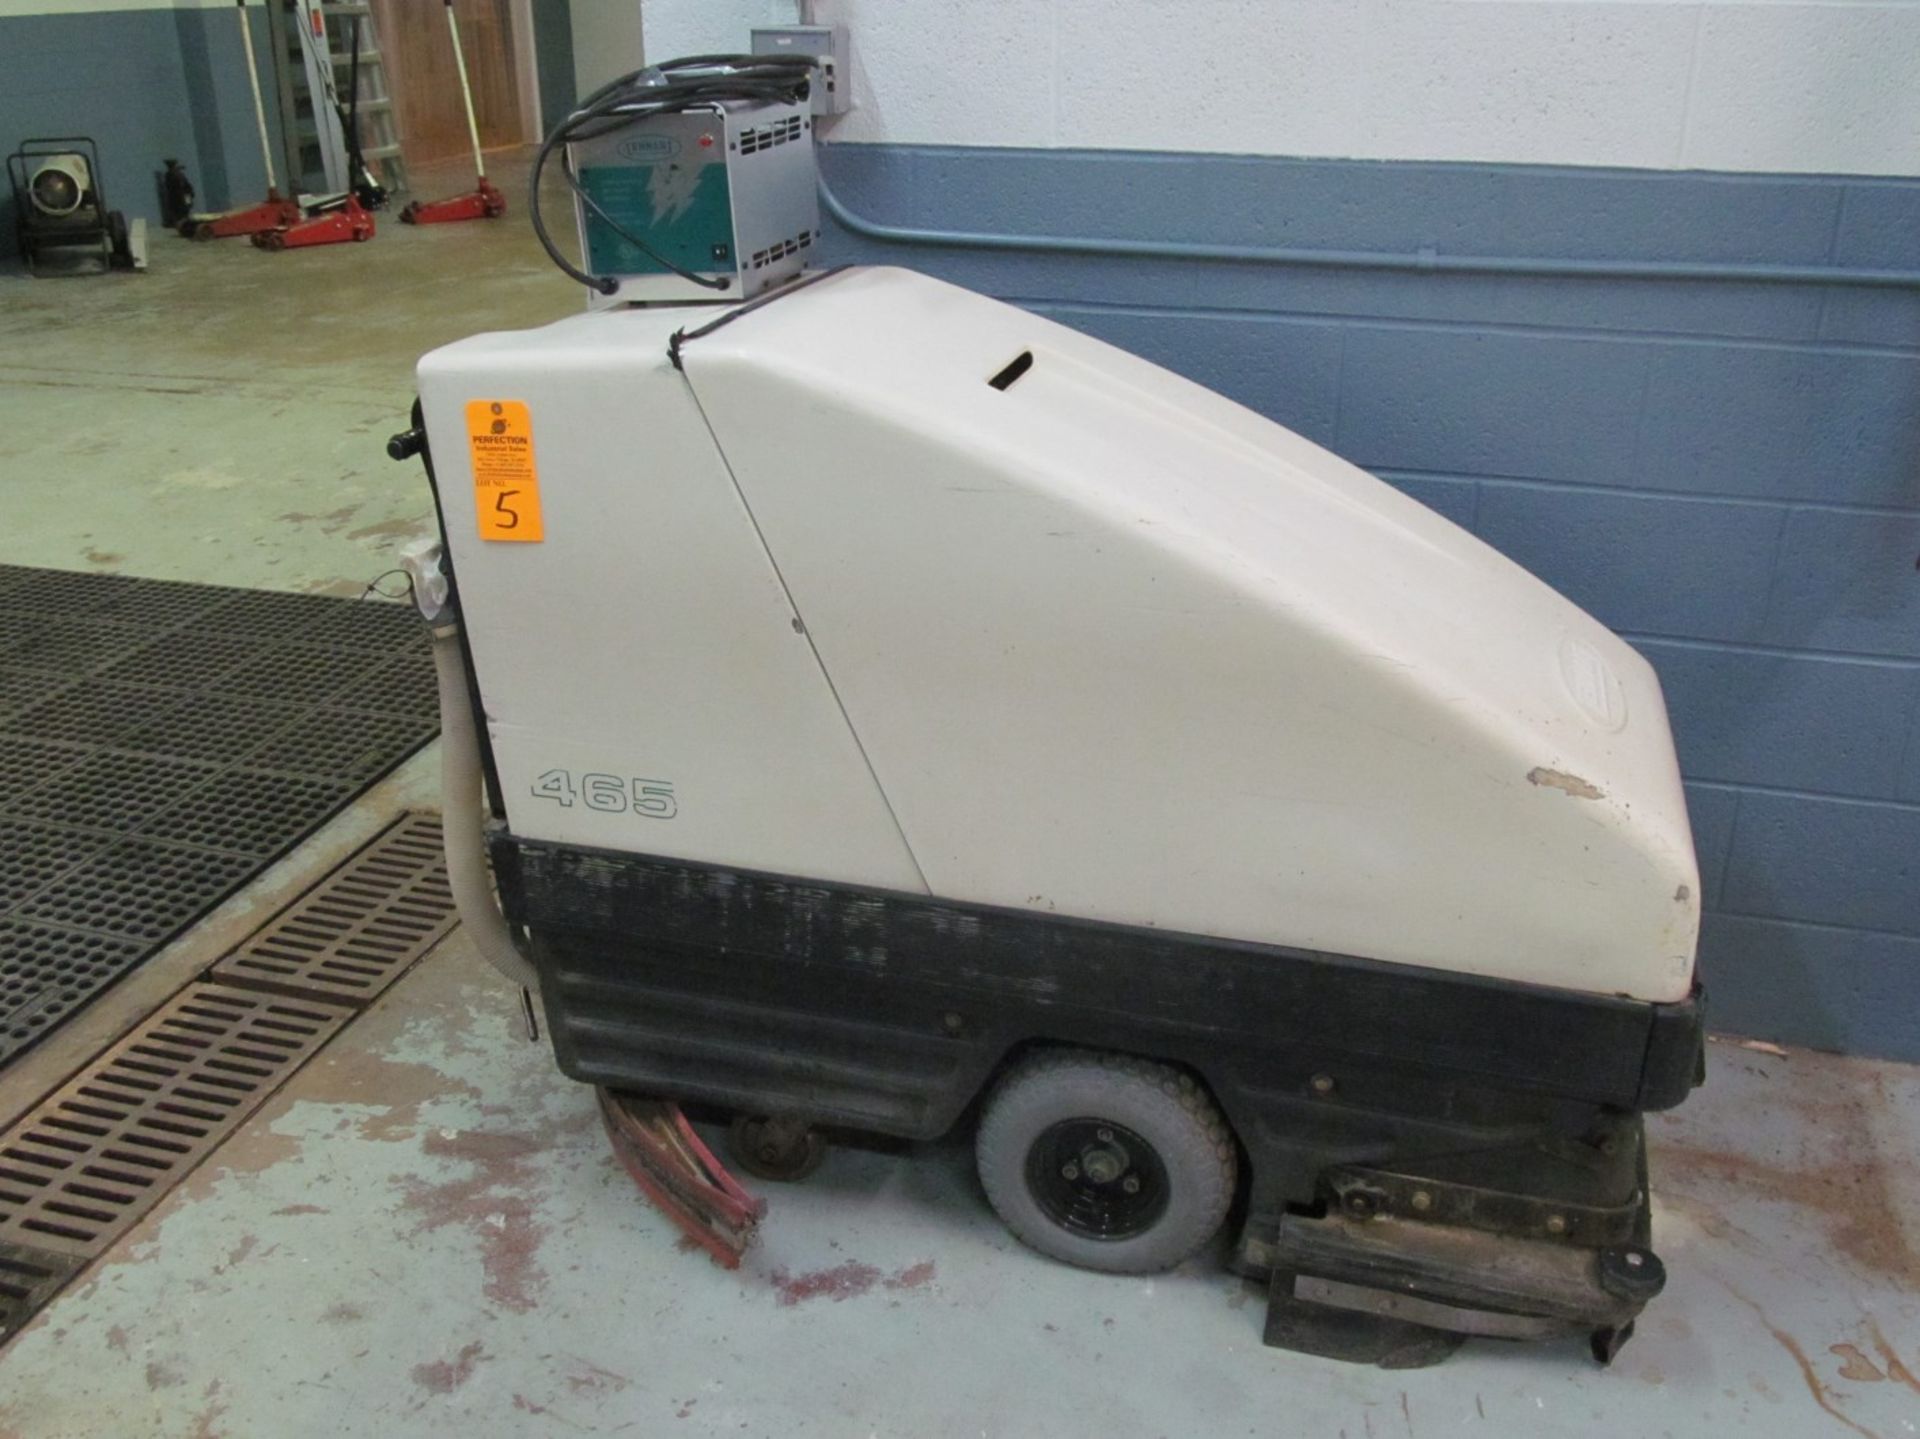 Tennant 465, 28" Electric Walk Behind Floor Scrubber, (w/ Charger), 36 Volt